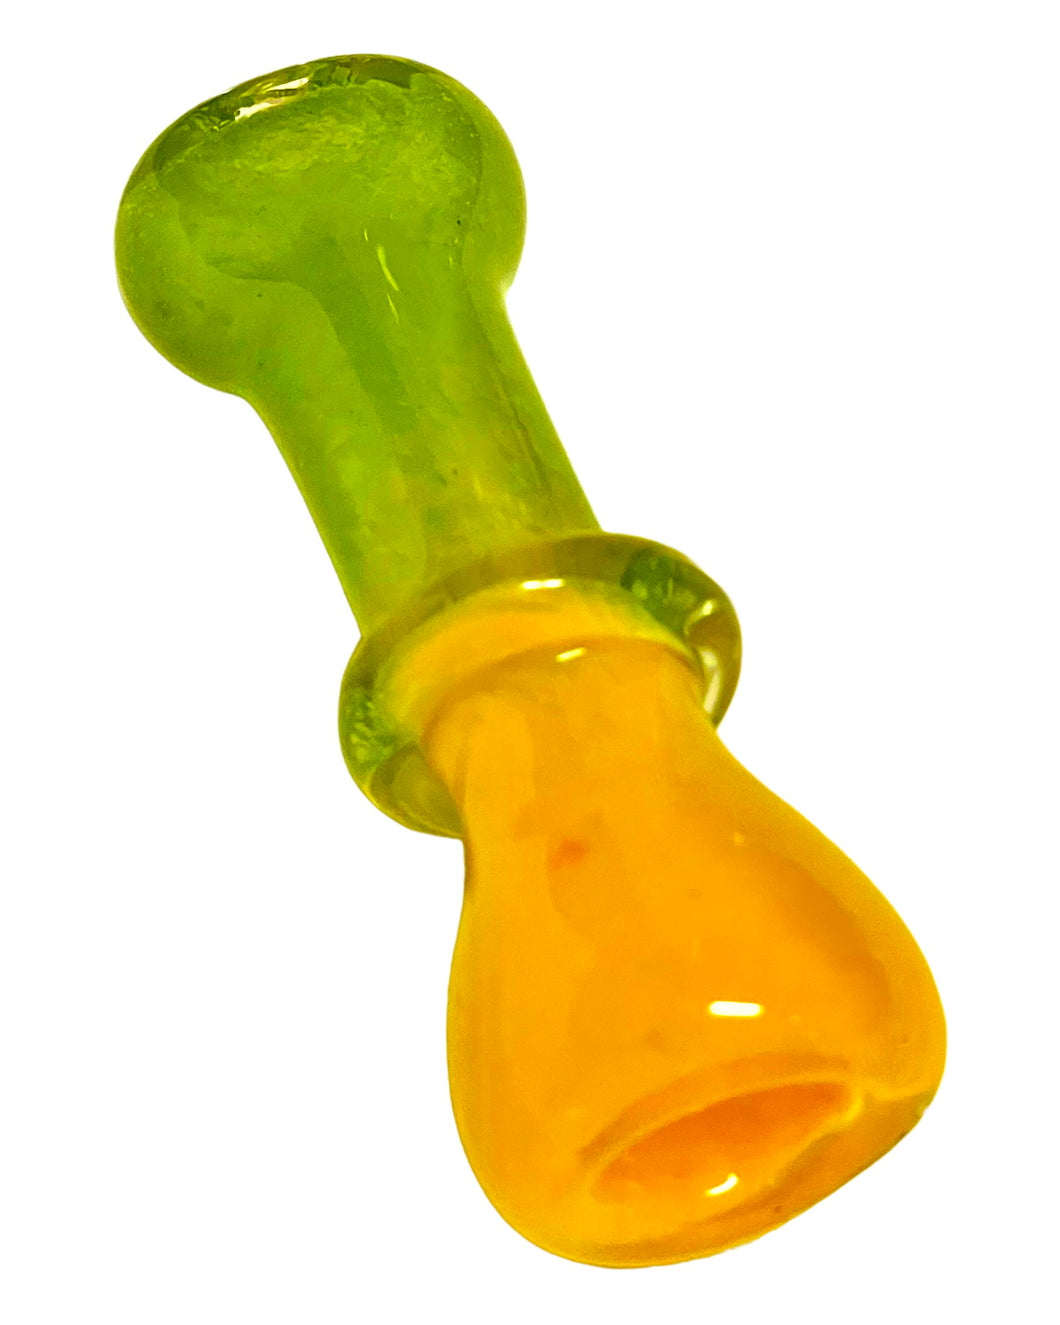 A yellow and green Two Tone Maria Glass Chillum Pipe.